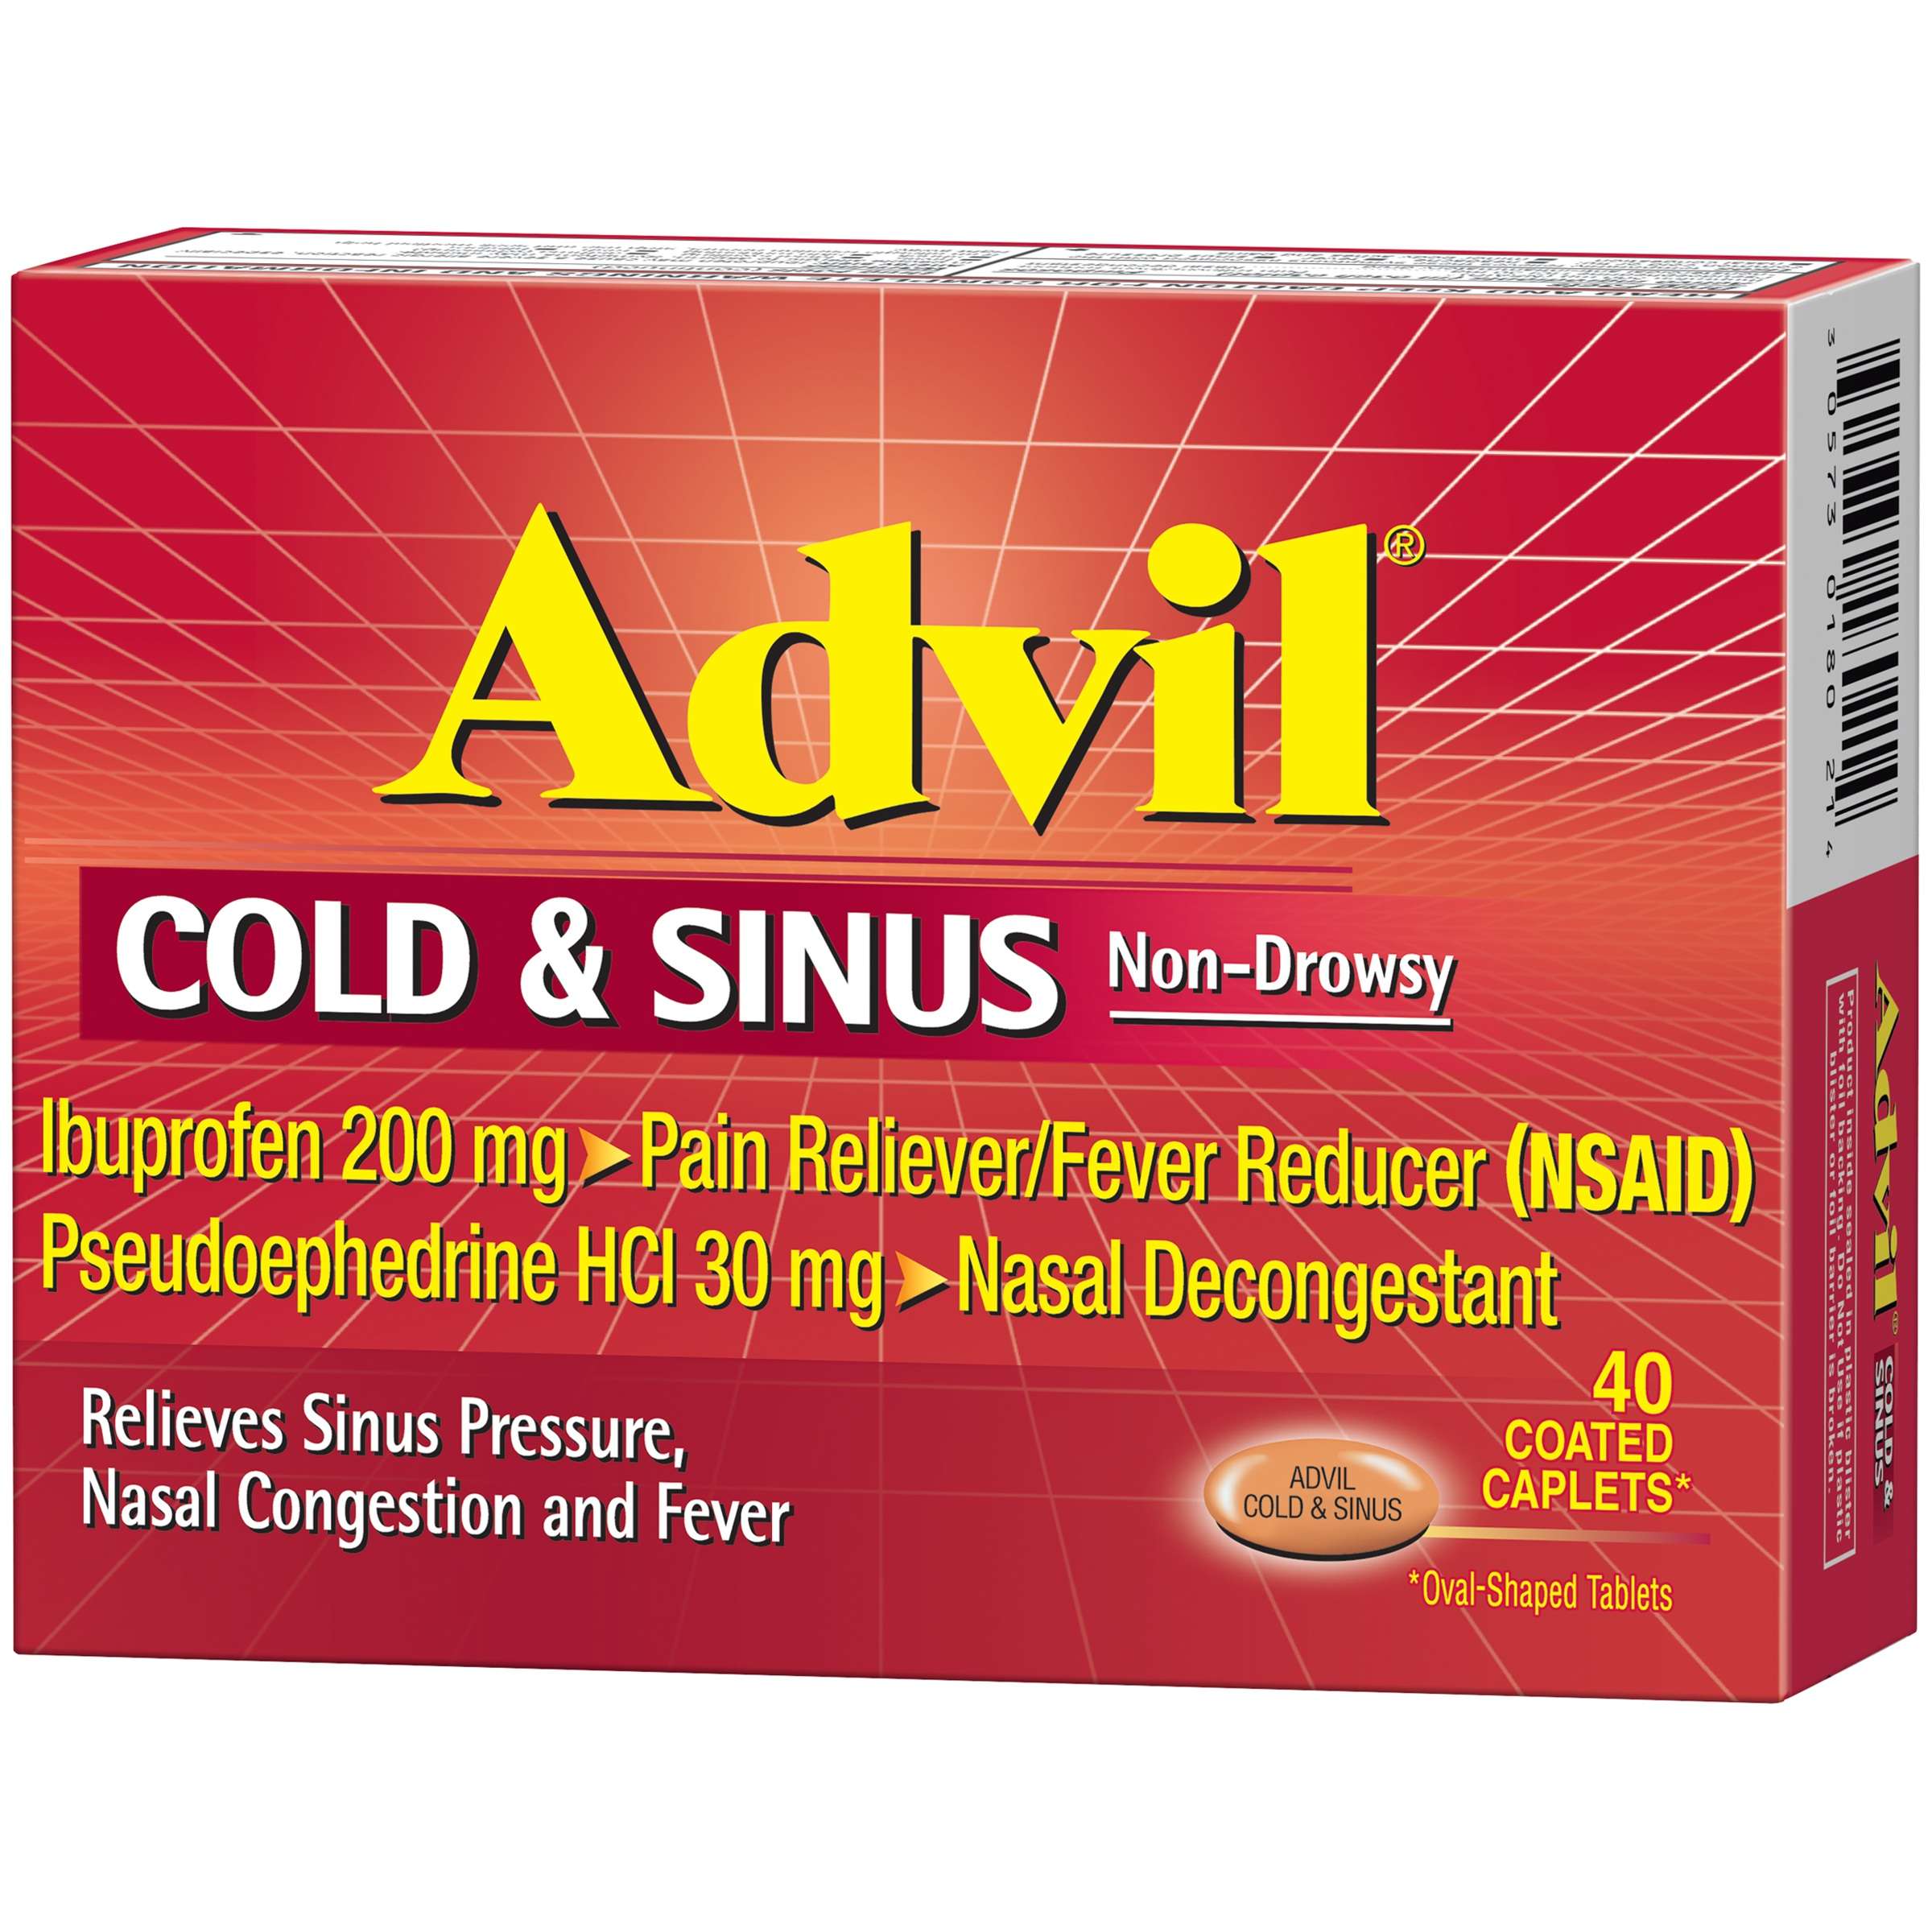 30 Advil Cold And Sinus Label